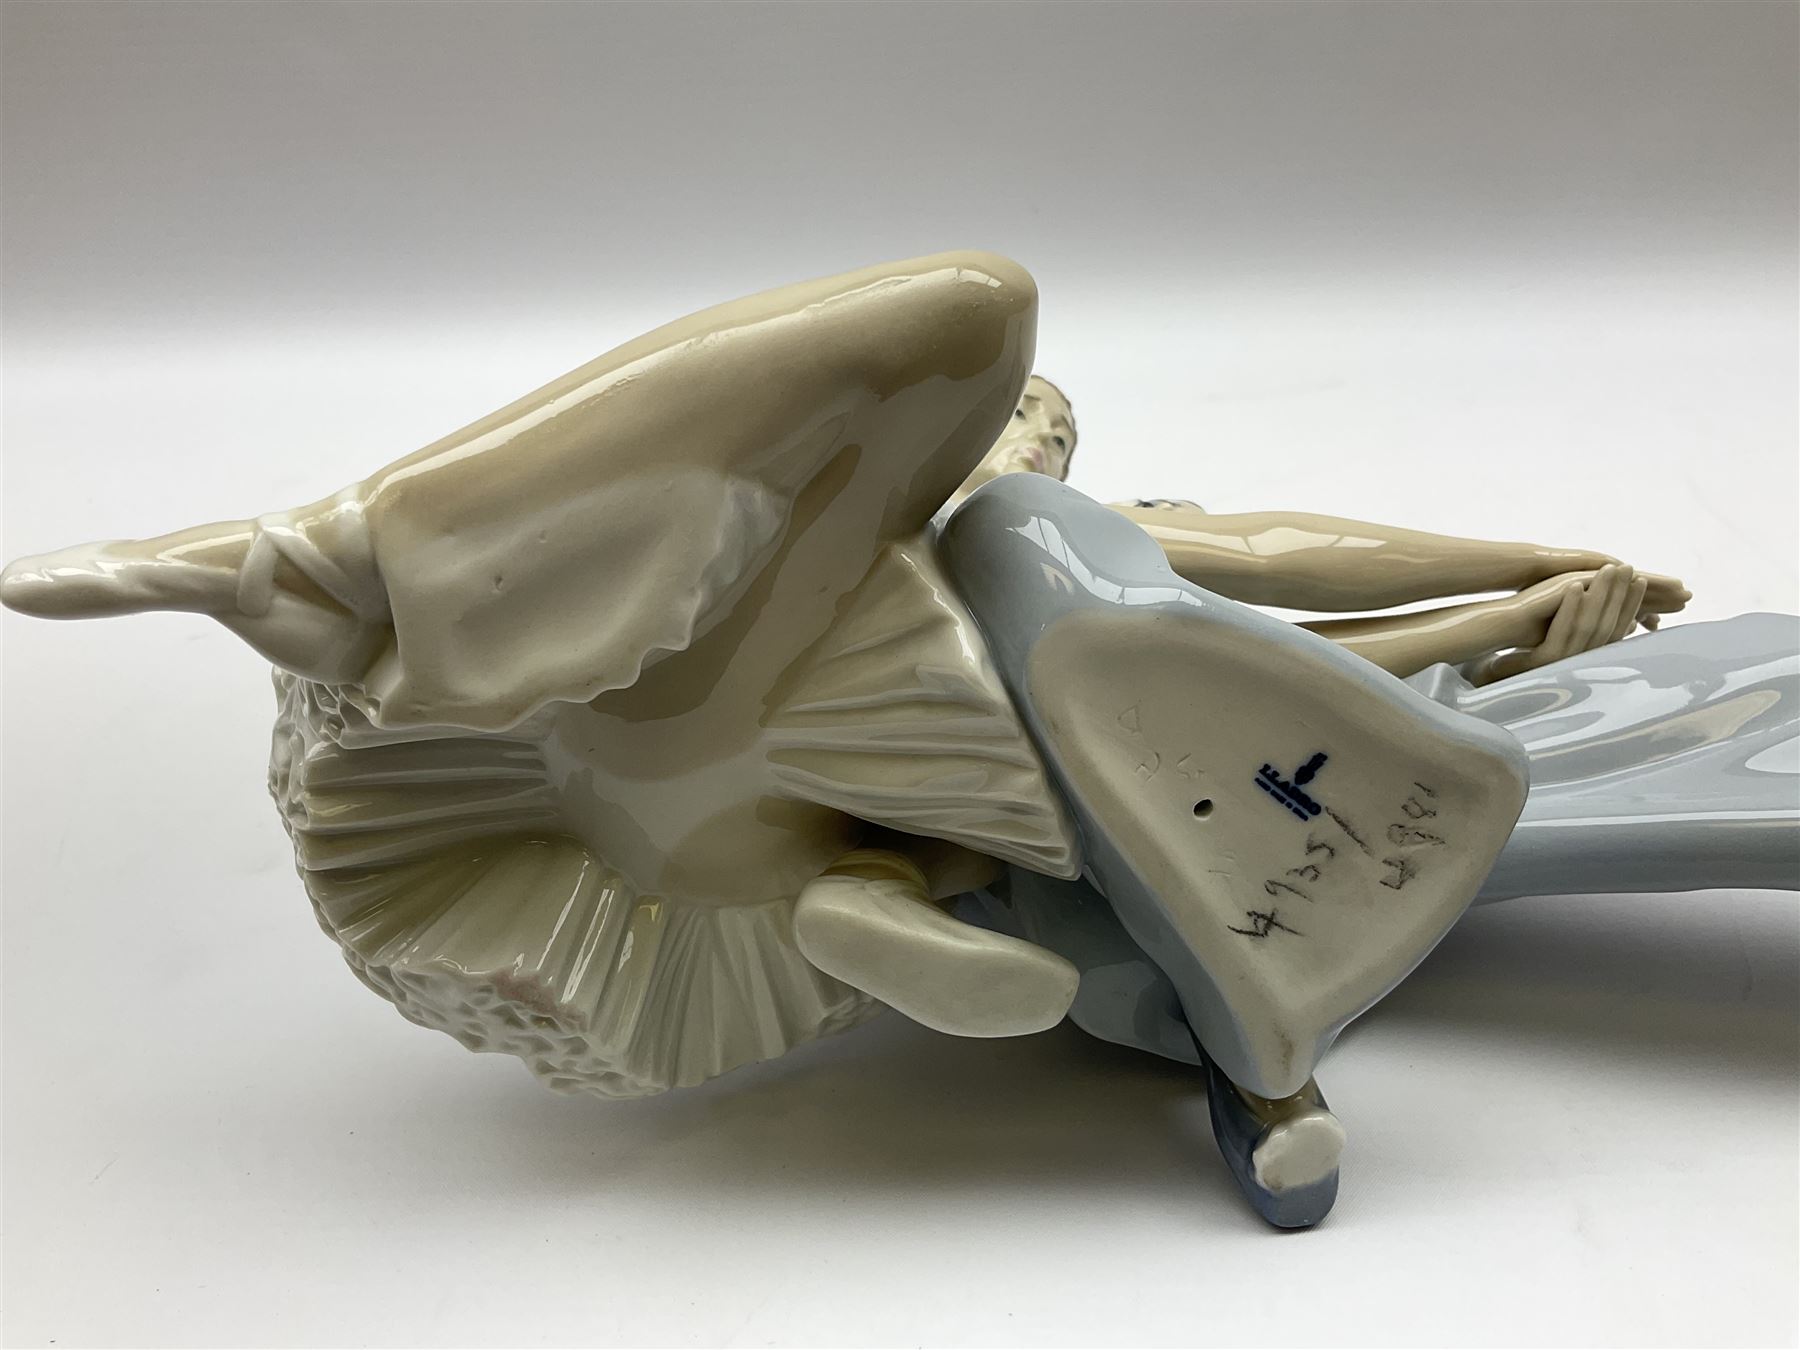 A Lladro Closing Scene Porcelain sculpture for sale at auction on 28th  January